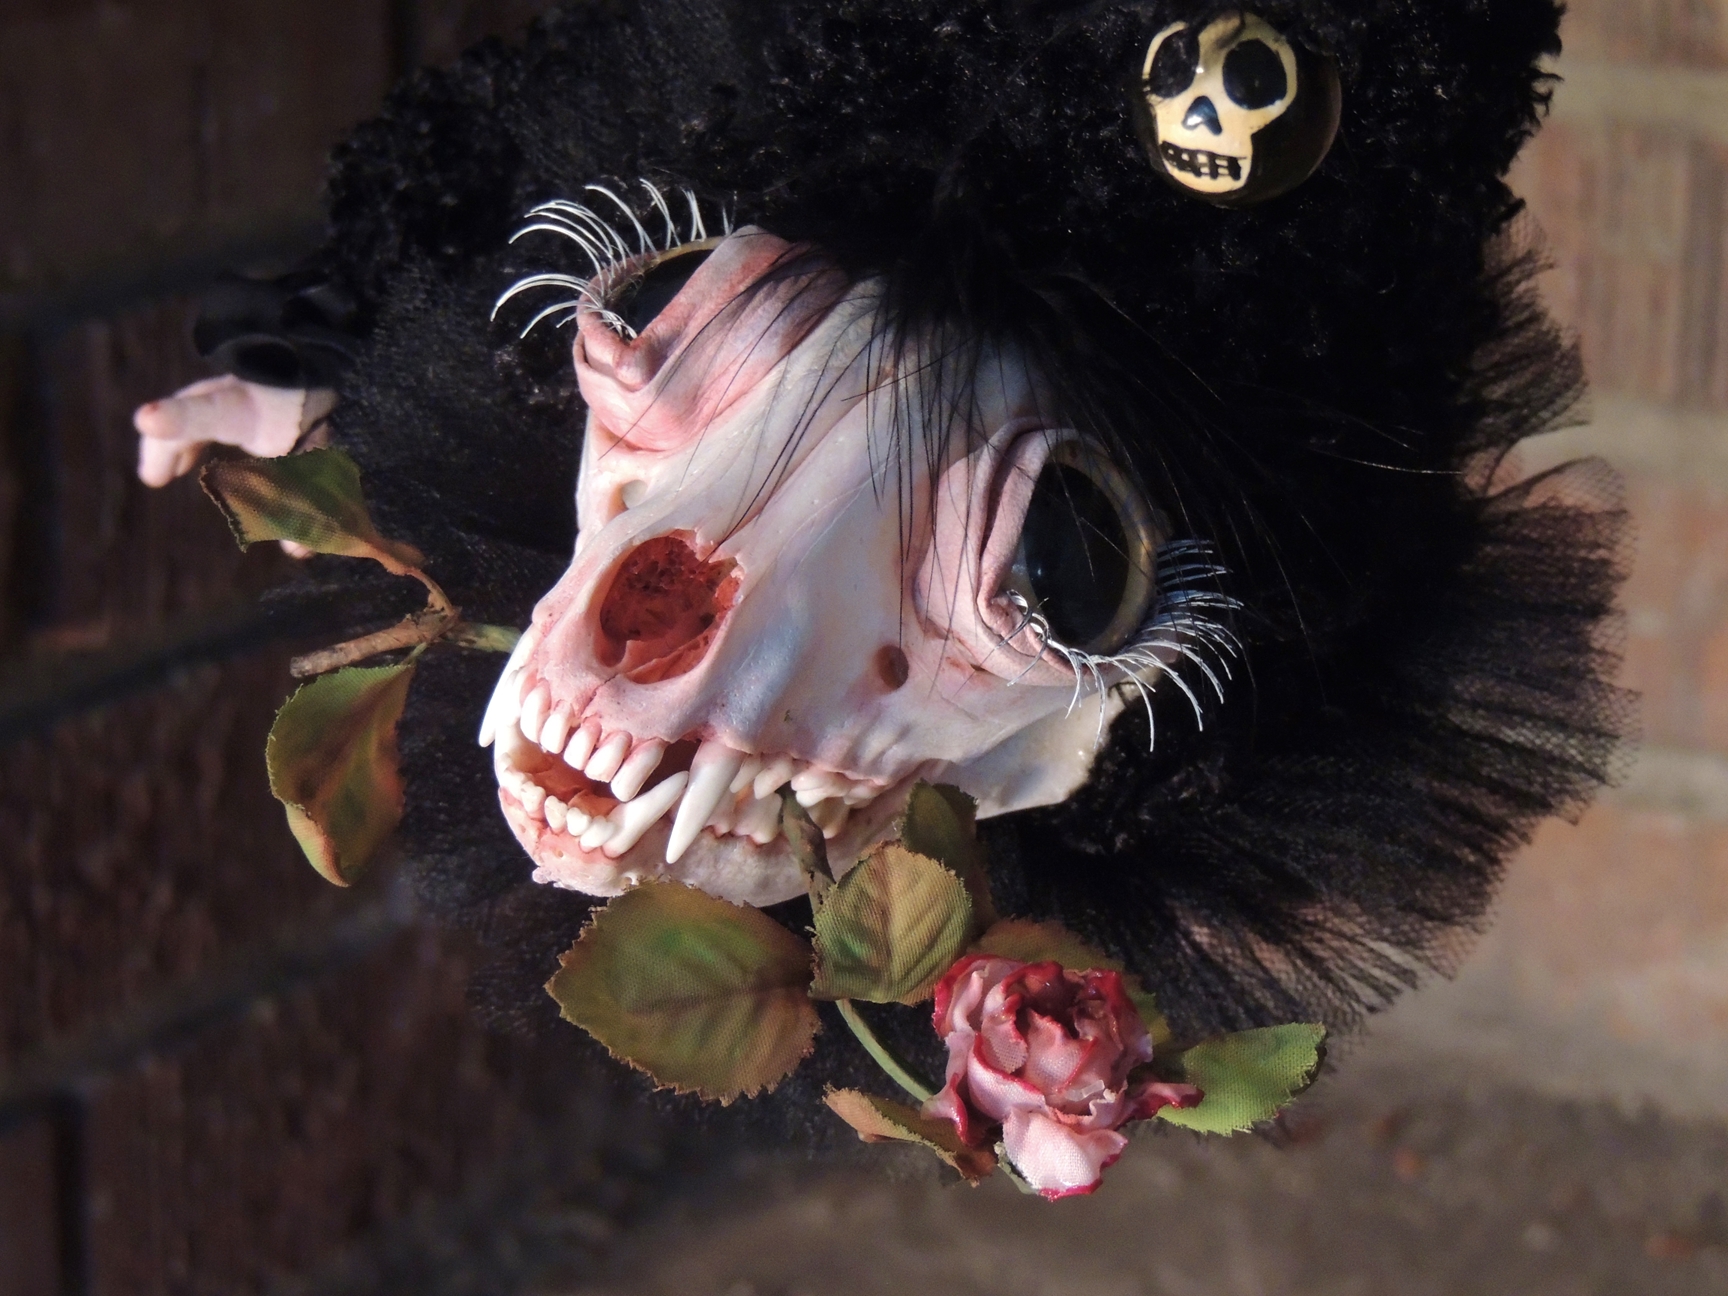 long-hanging artdoll fantasy beast doll with painted racoon skull, curly black mohair fur covered body and vinyl doll feet silk rose in his teeth